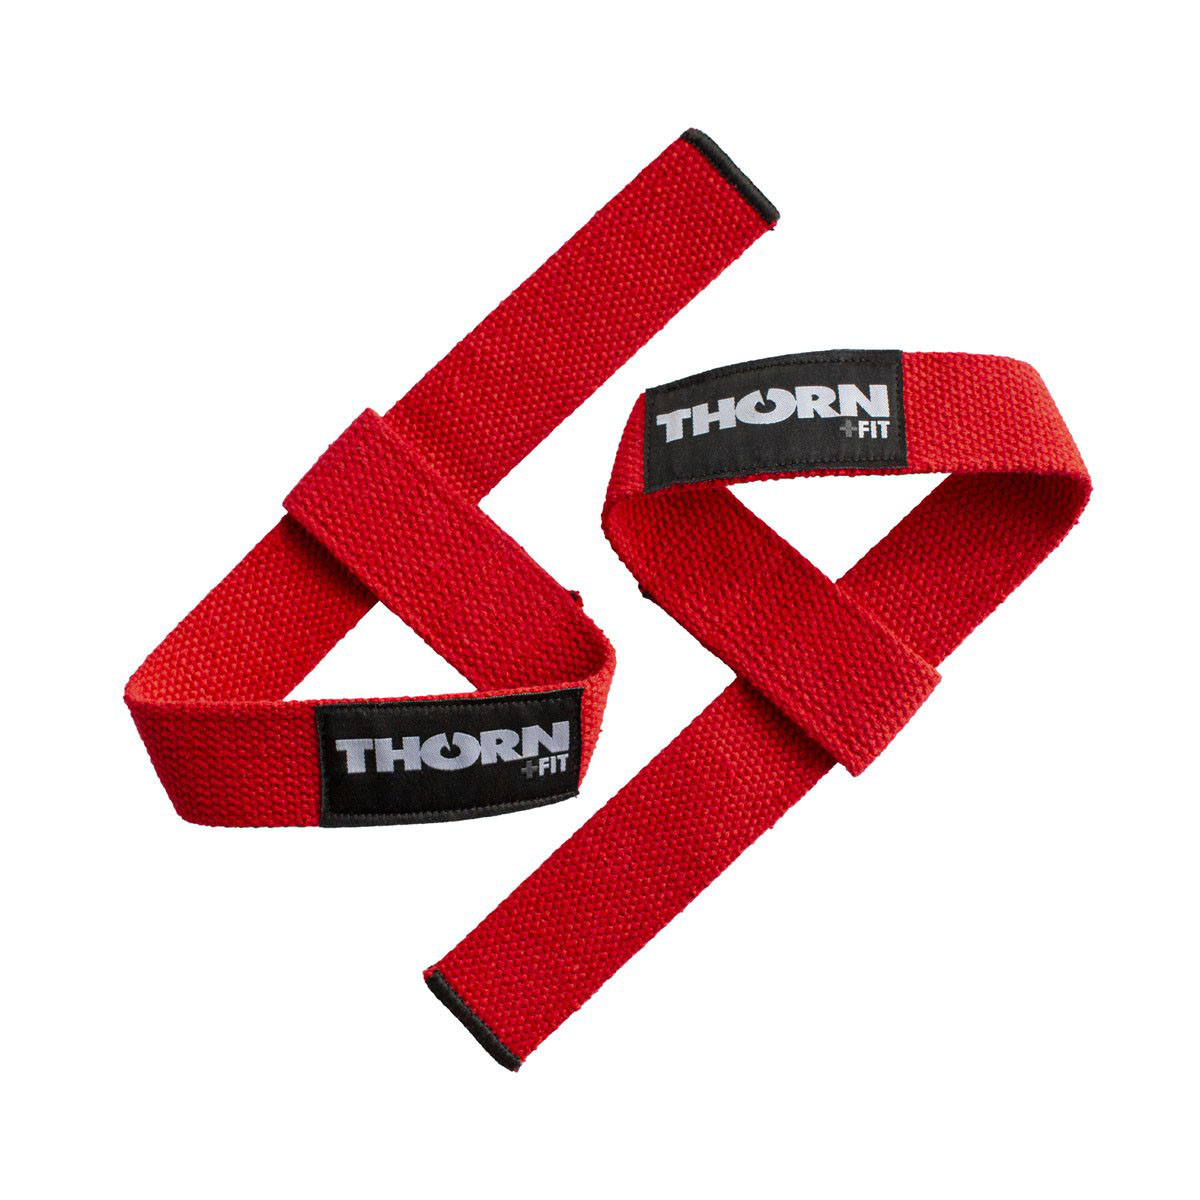 THORN FIT Lifting straps cotton red – Thorn Fit, Crossfit equipment